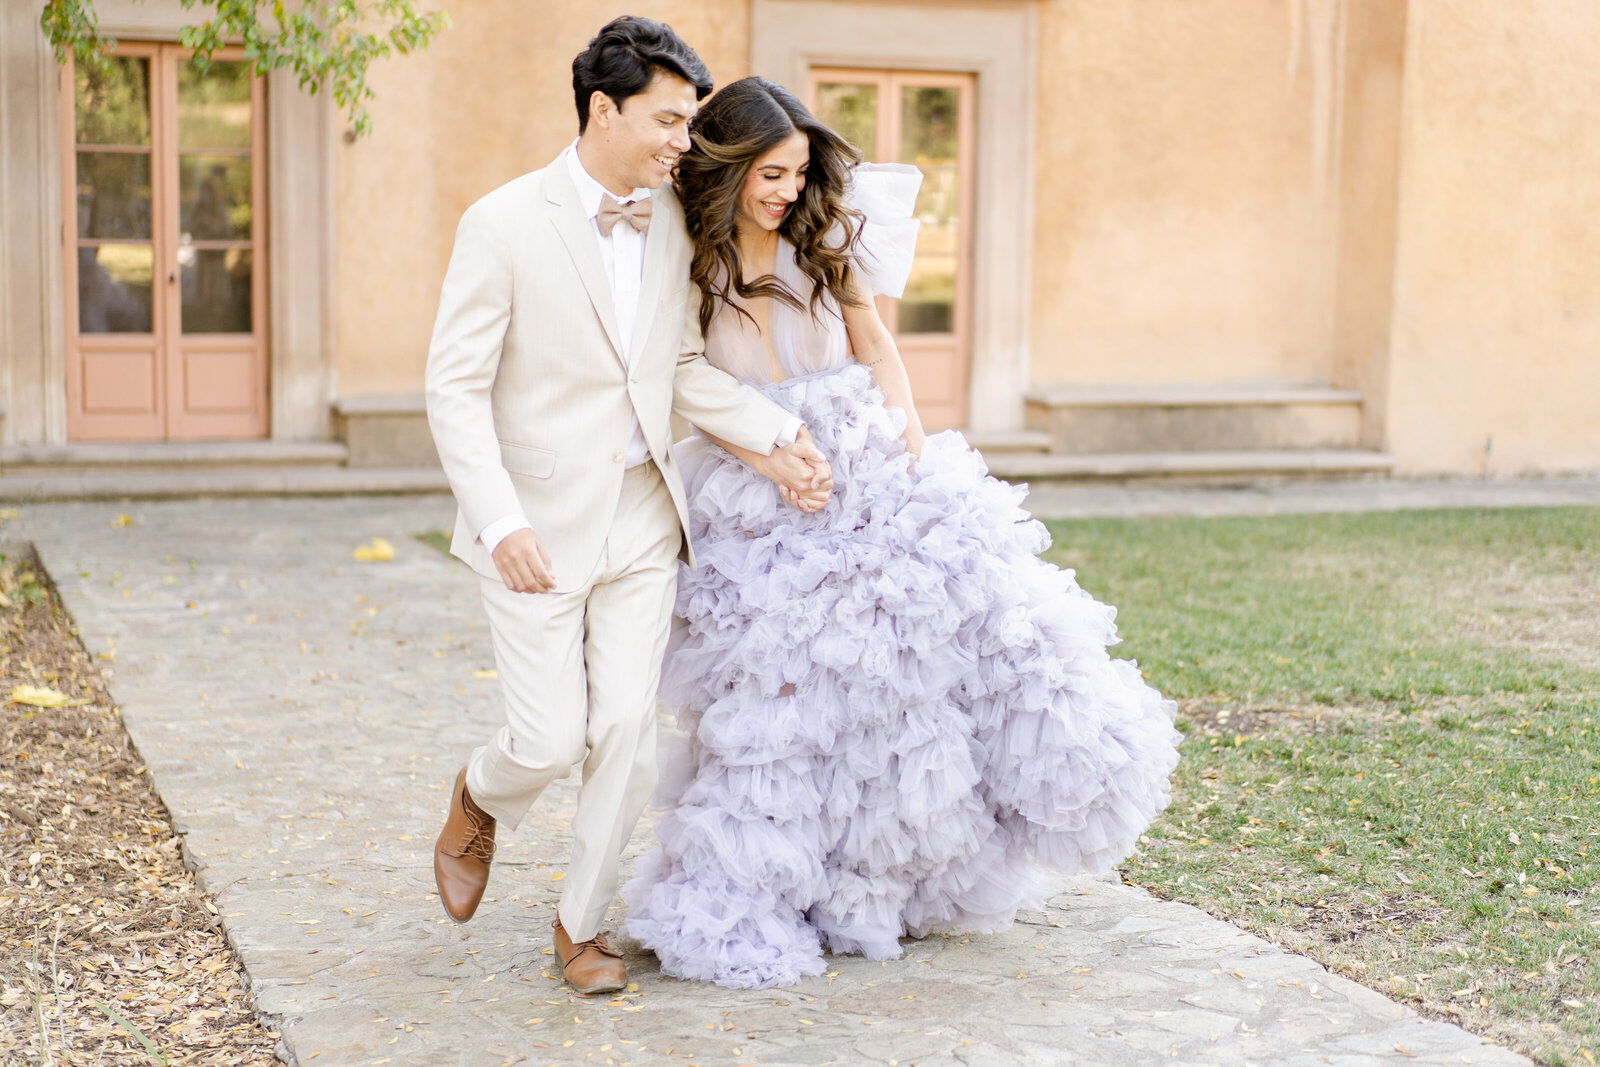 Portrait of bride and groom in a lavender wedding gown and cream suit in front of a Spanish-style venue